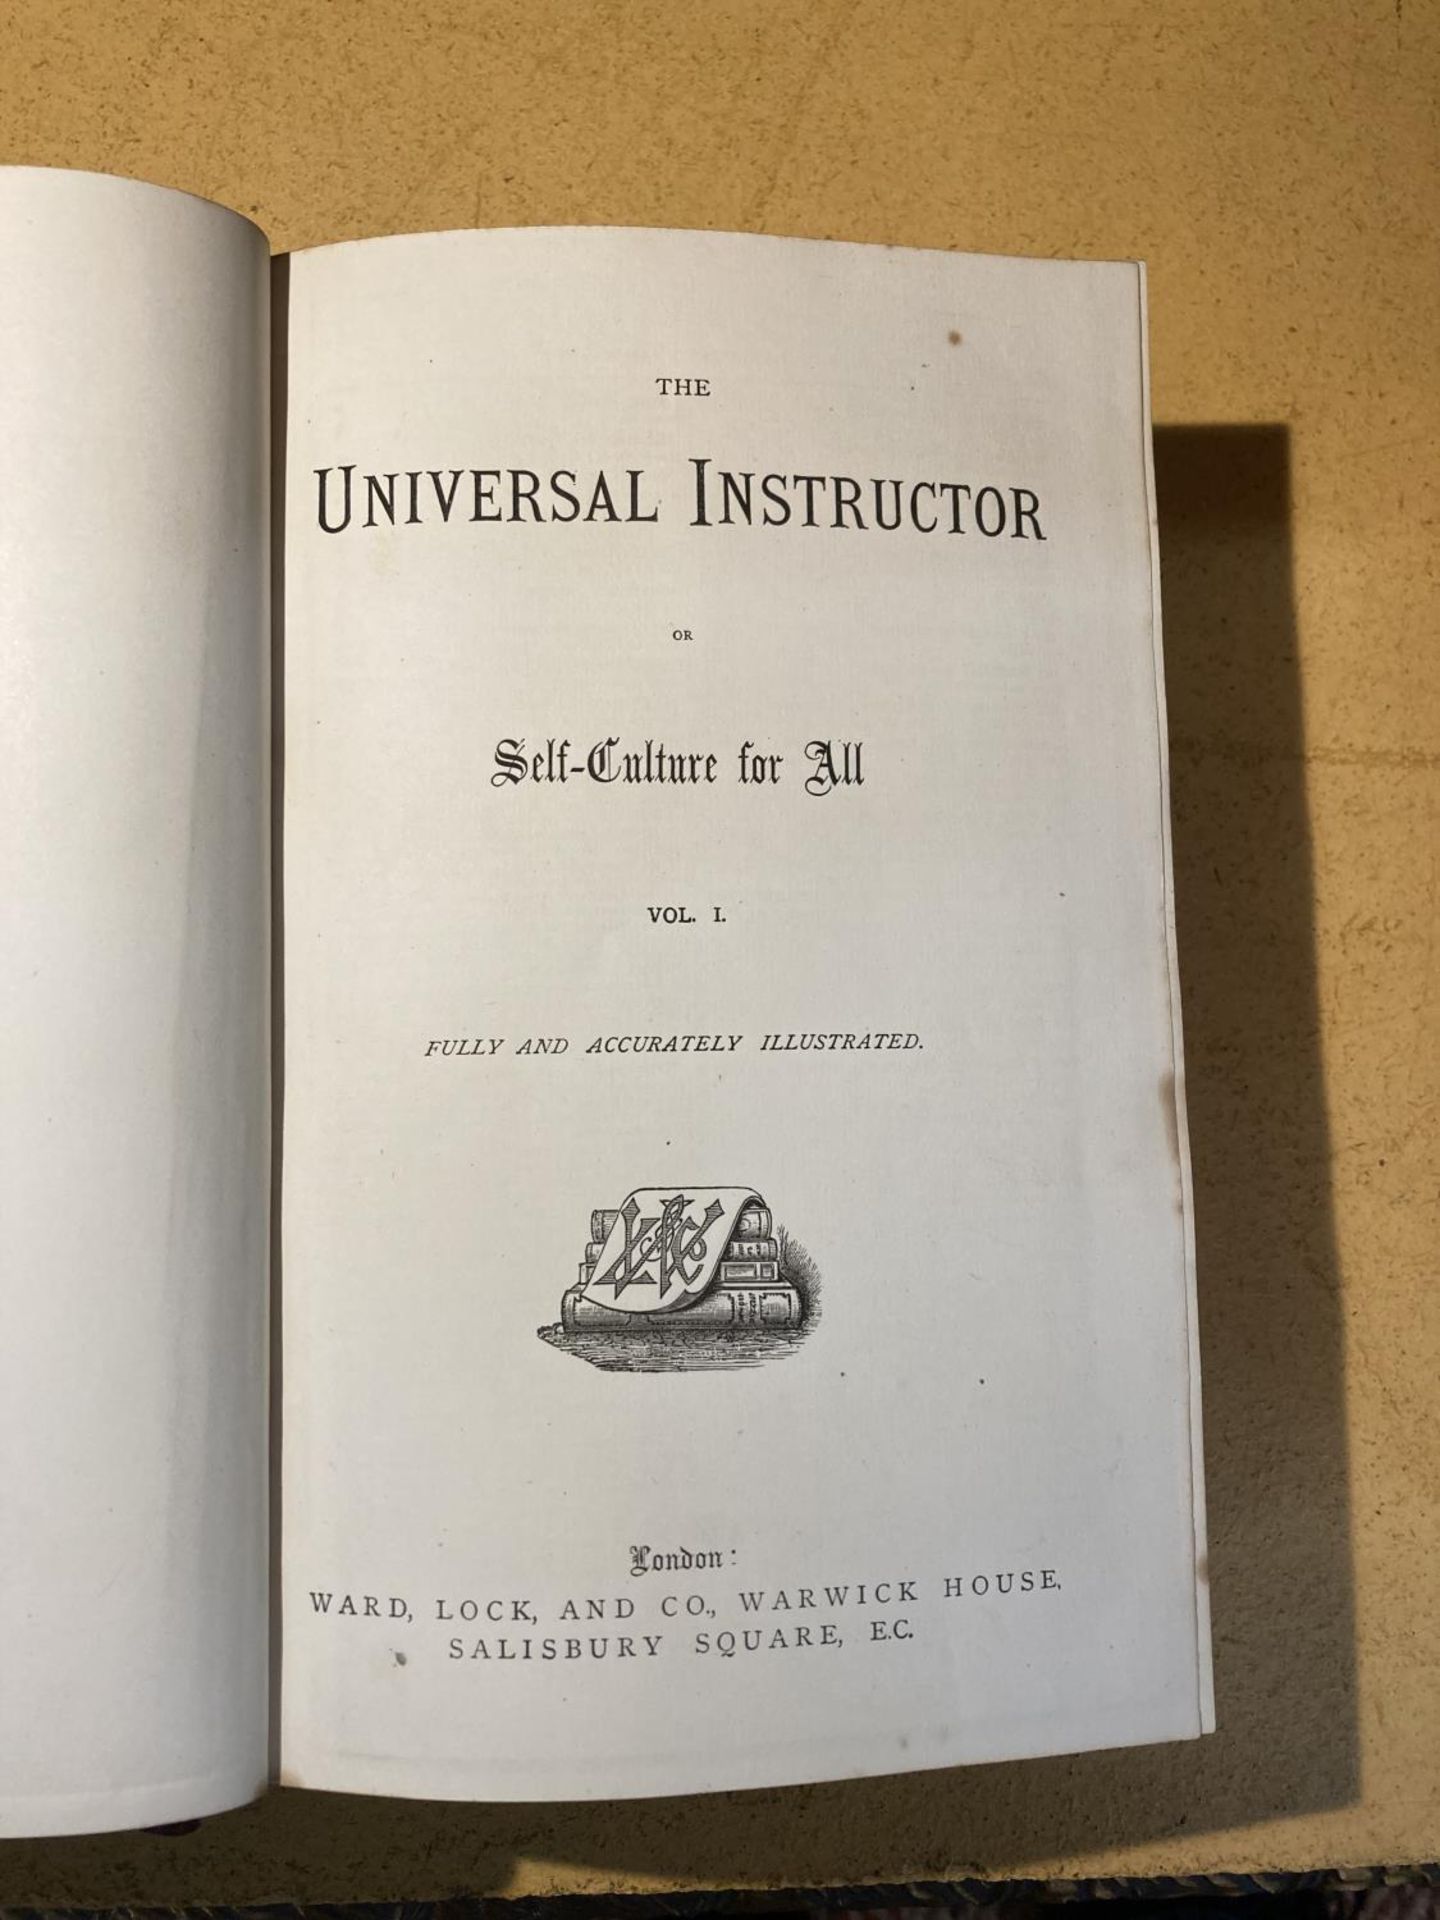 THE UNIVERSAL INSTRUCTOR OF SELF CULTURE FOR ALL - 3 VOLUMES PUBLISHED BY WARD, LOCK & CO, CIRCA - Image 3 of 3